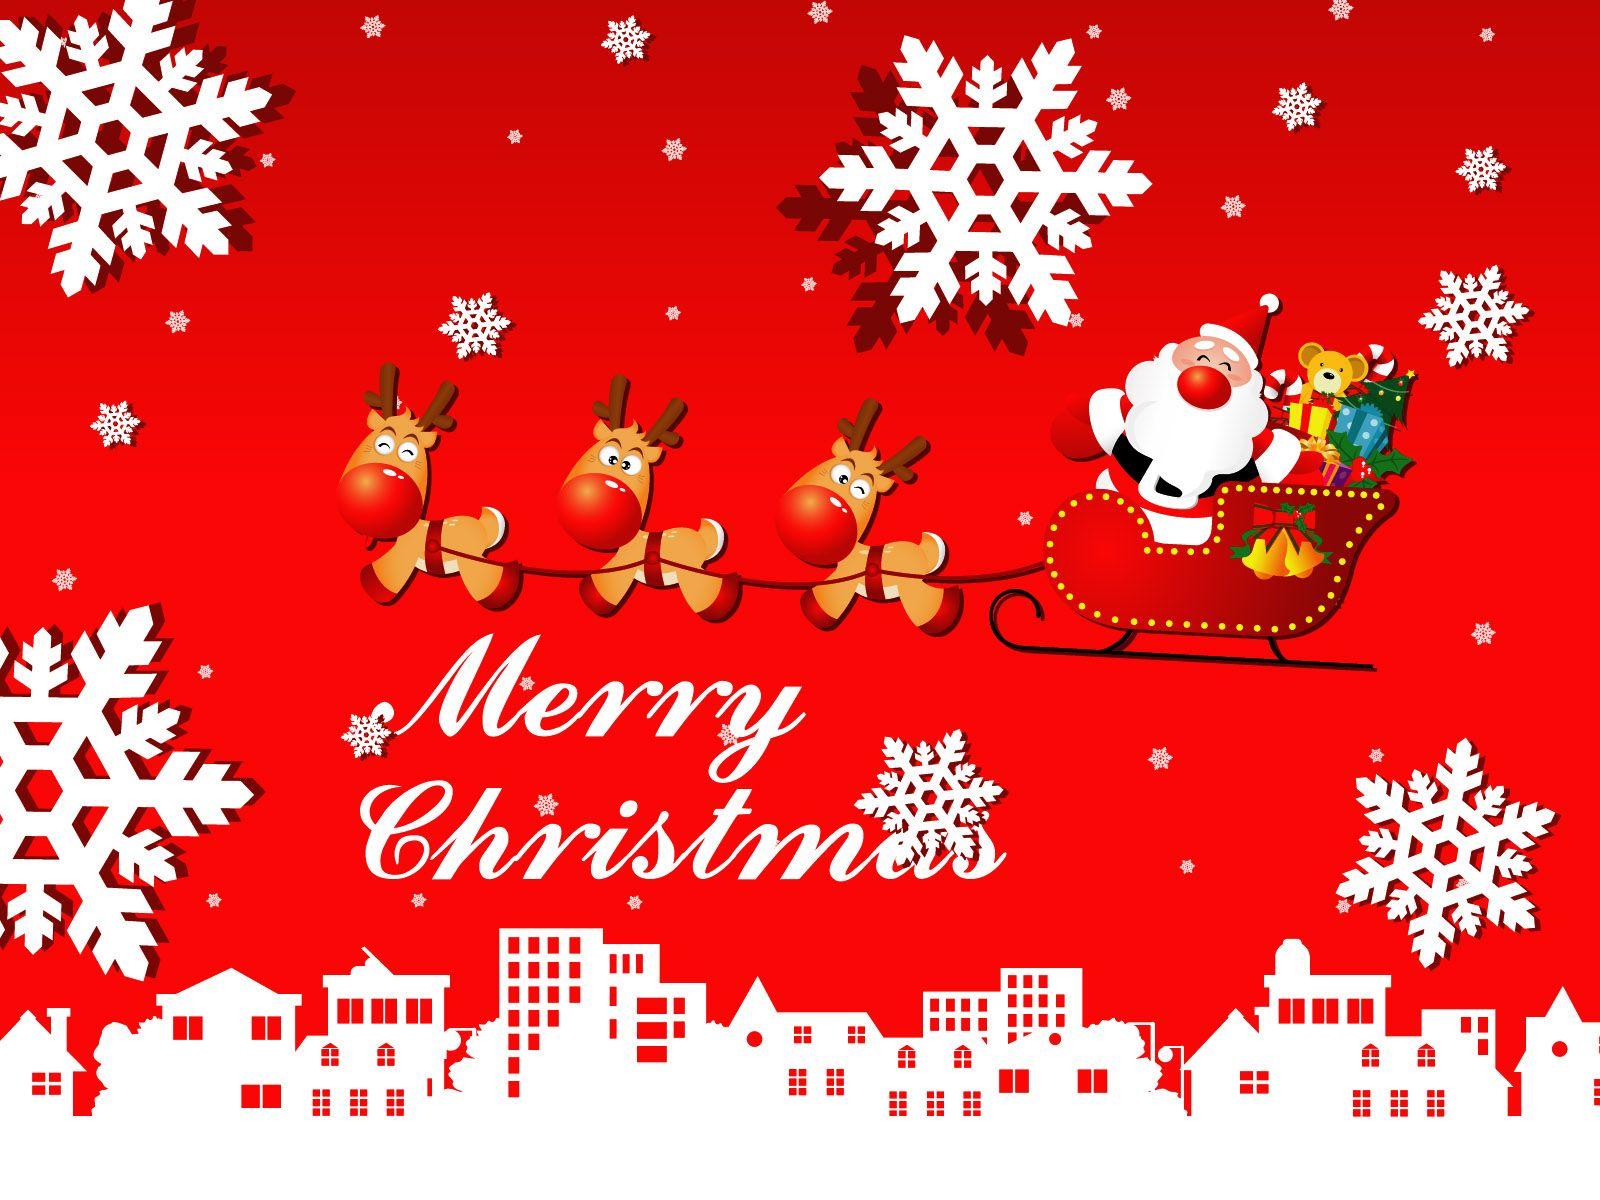 Jolly Santa / Christmas wallpaper and image, picture